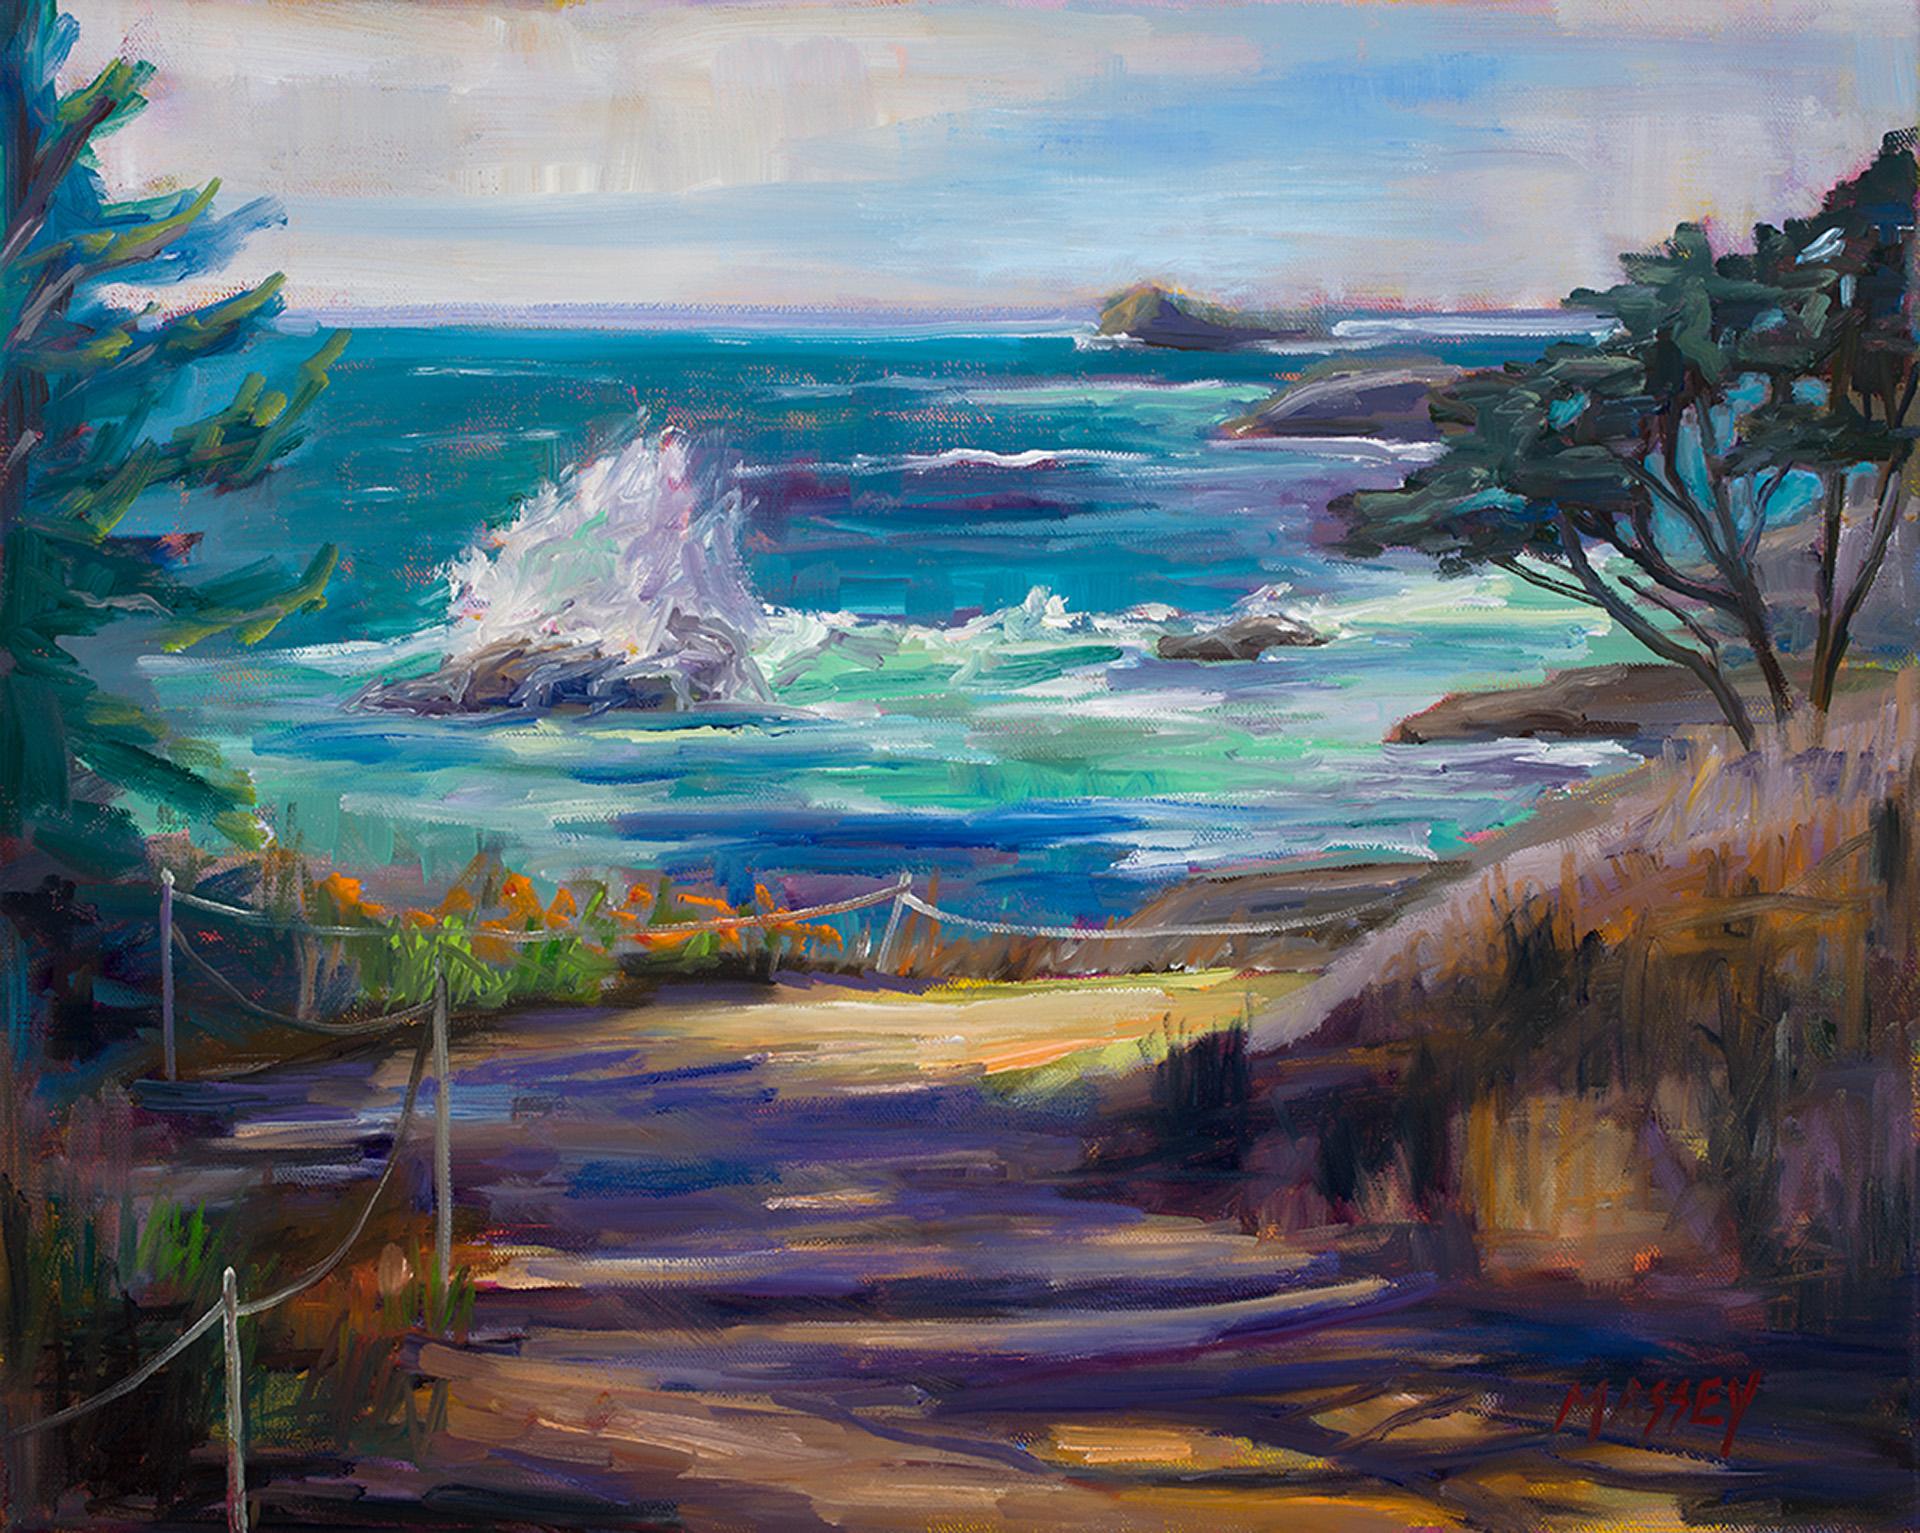 Marie Massey Landscape Painting - "Call of the West"